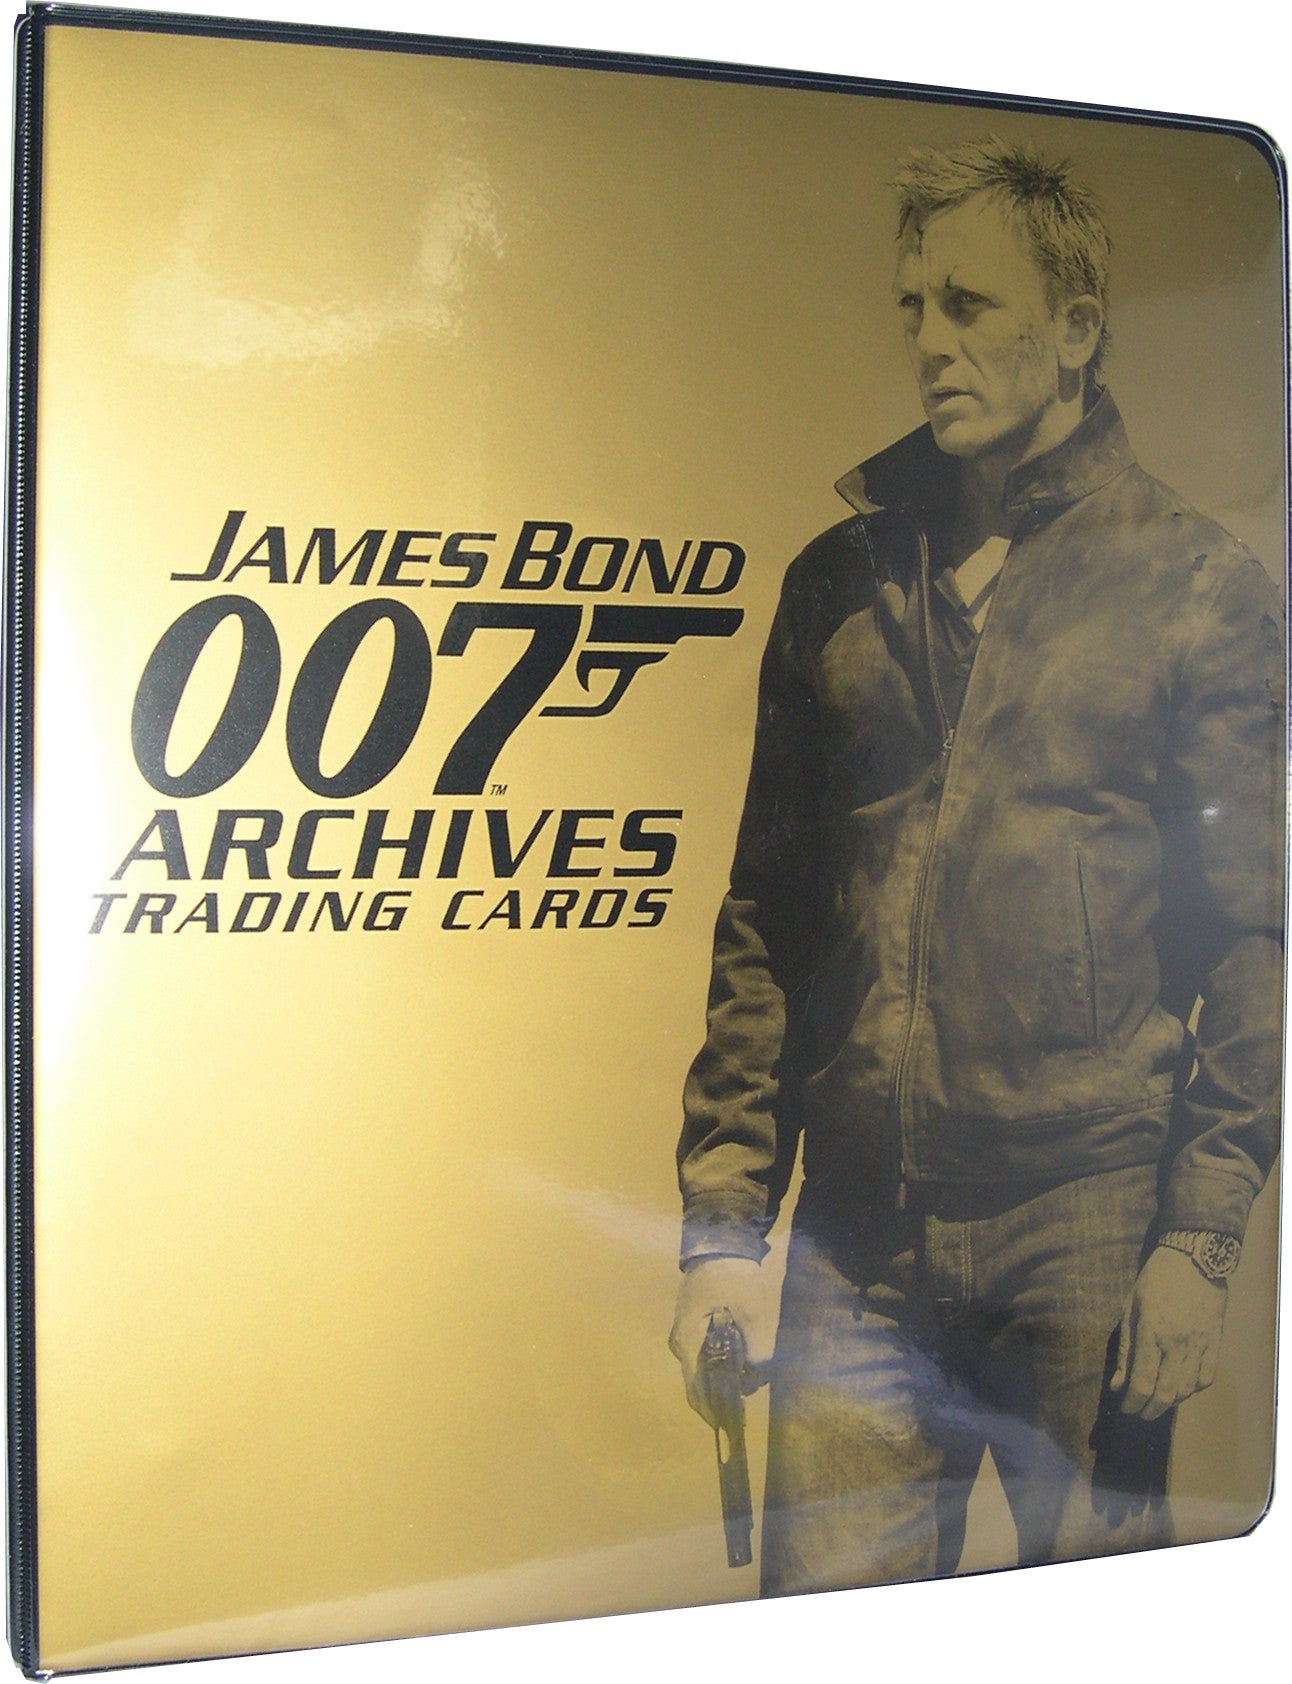 James Bond Archives Trading Card Binder Album with P3 Promo